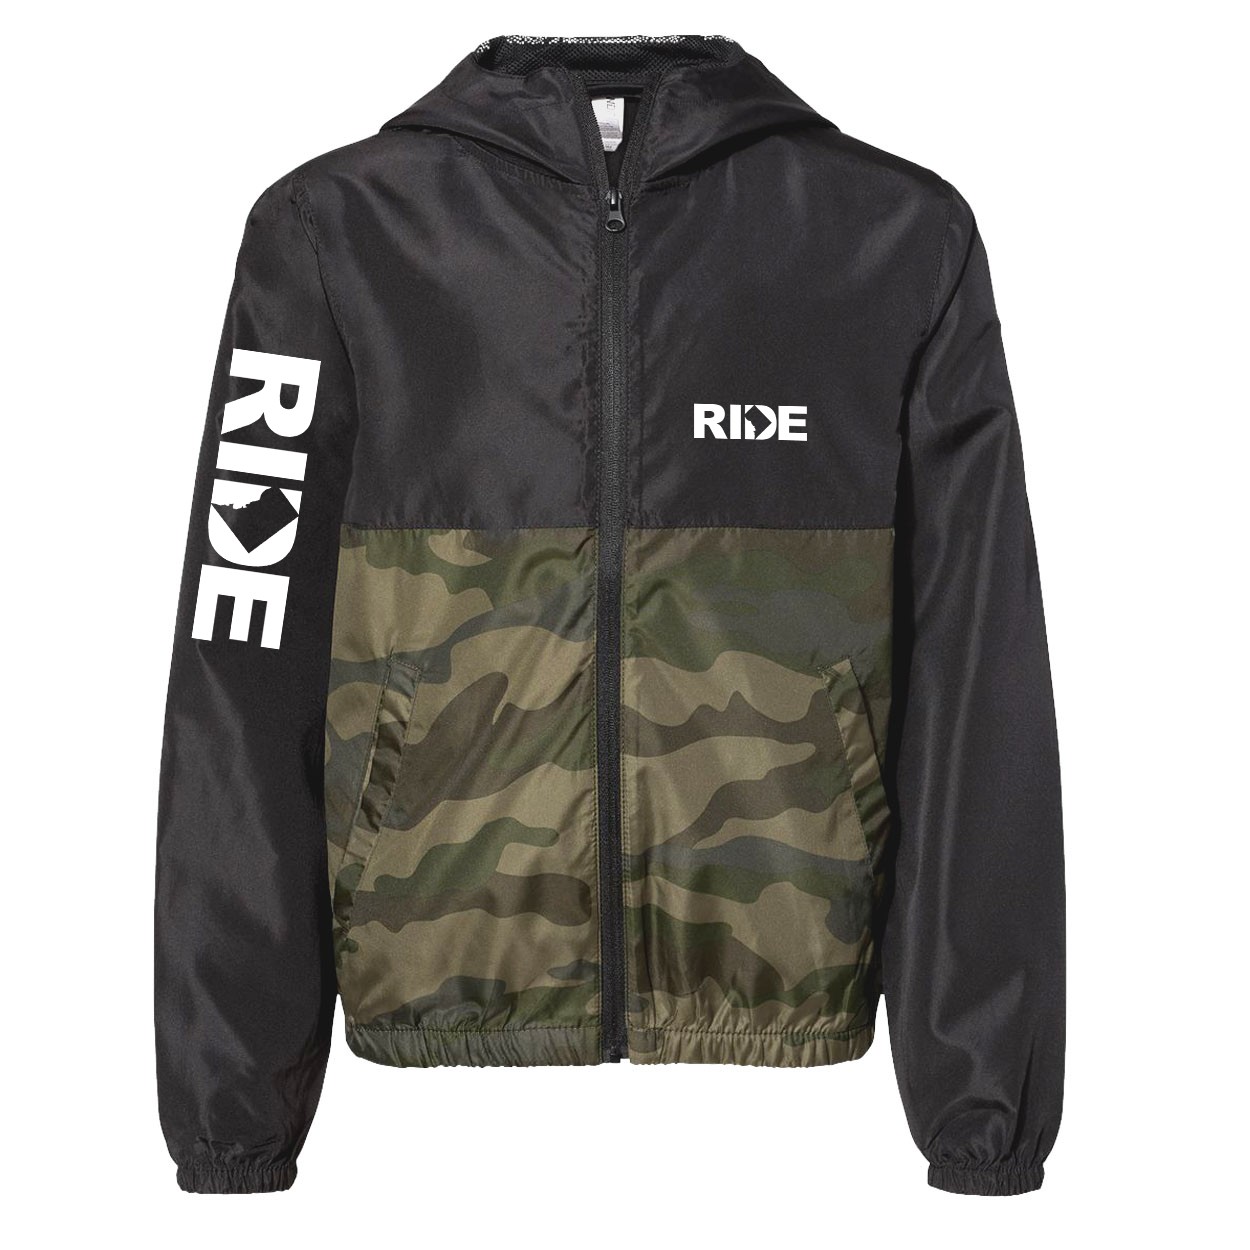 Ride District of Columbia Classic Youth Lightweight Windbreaker Black/Forest Camo (White Logo)